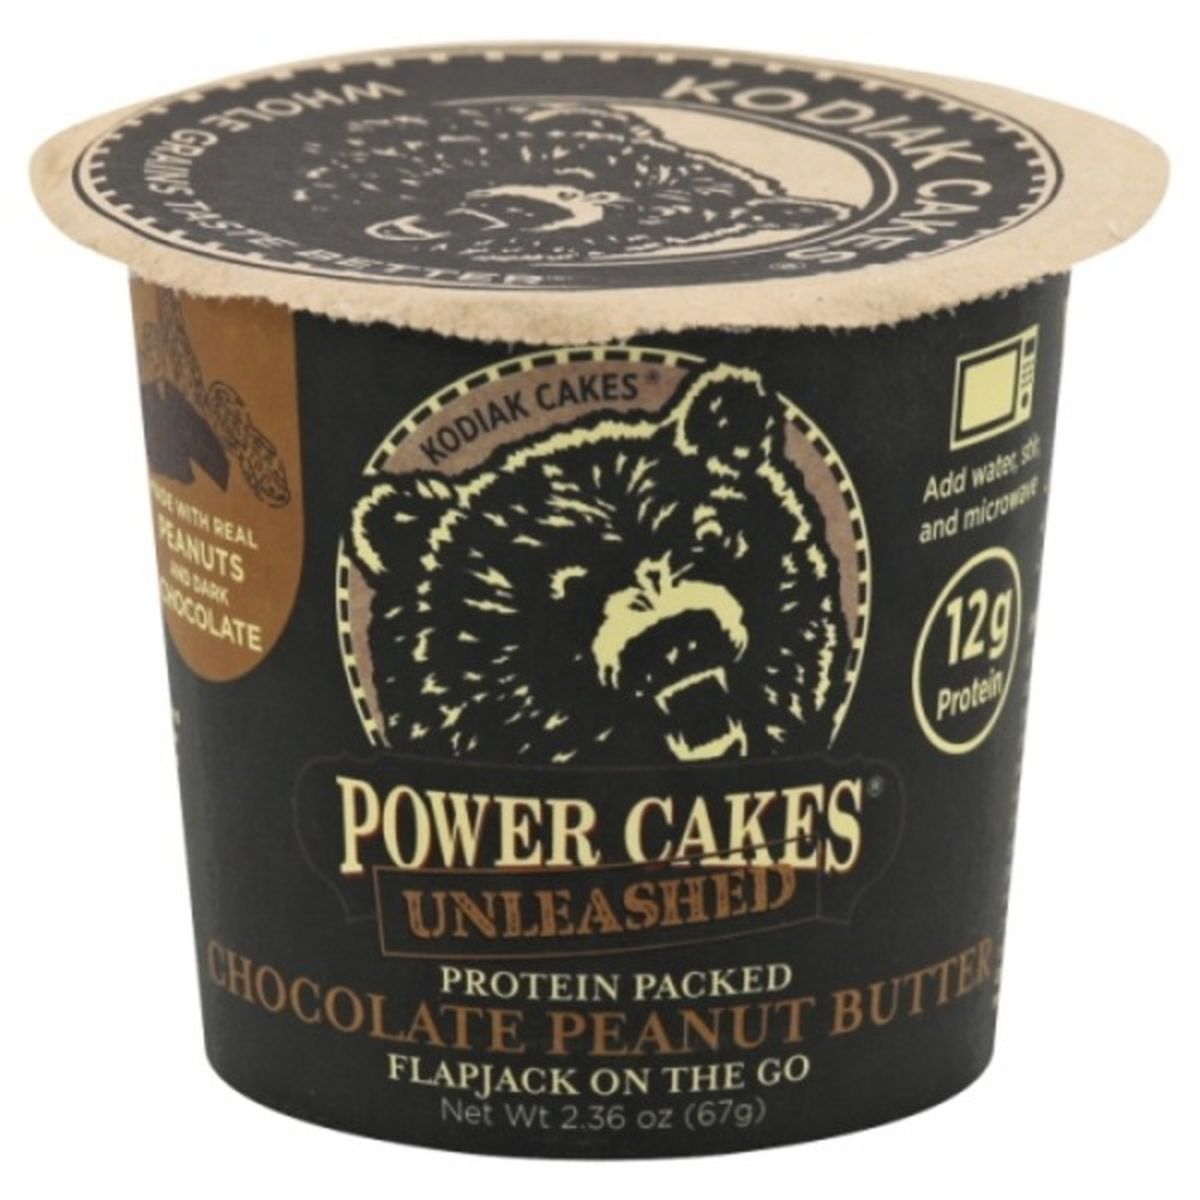 Calories in Kodiak Cakes Power Cakes Unleashed Flapjack On the Go, Chocolate Peanut Butter